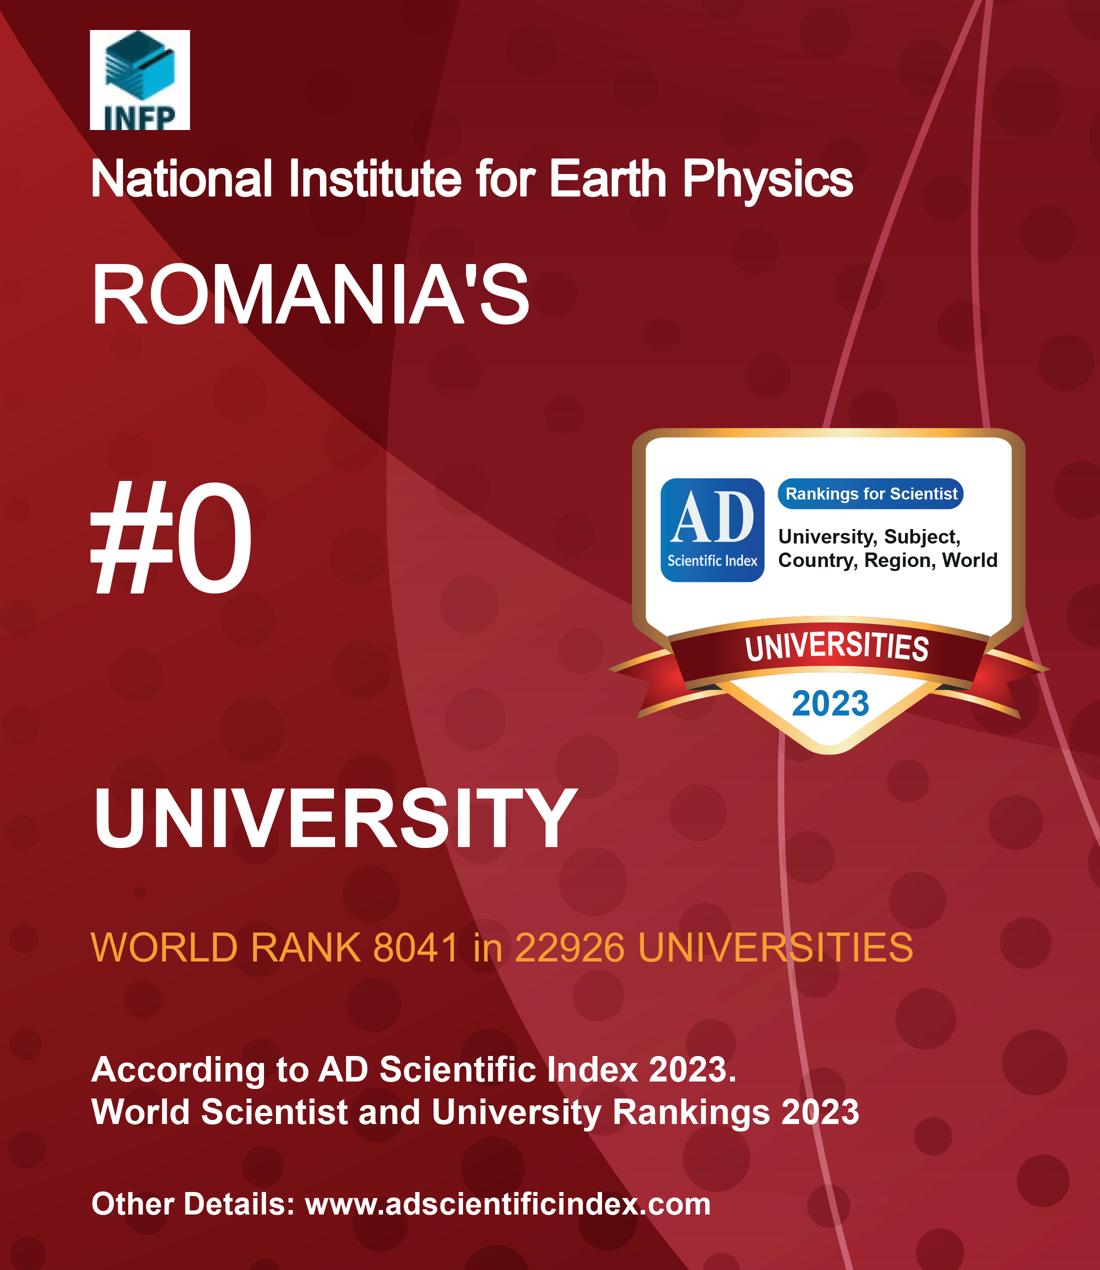 National Institute for Earth Physics